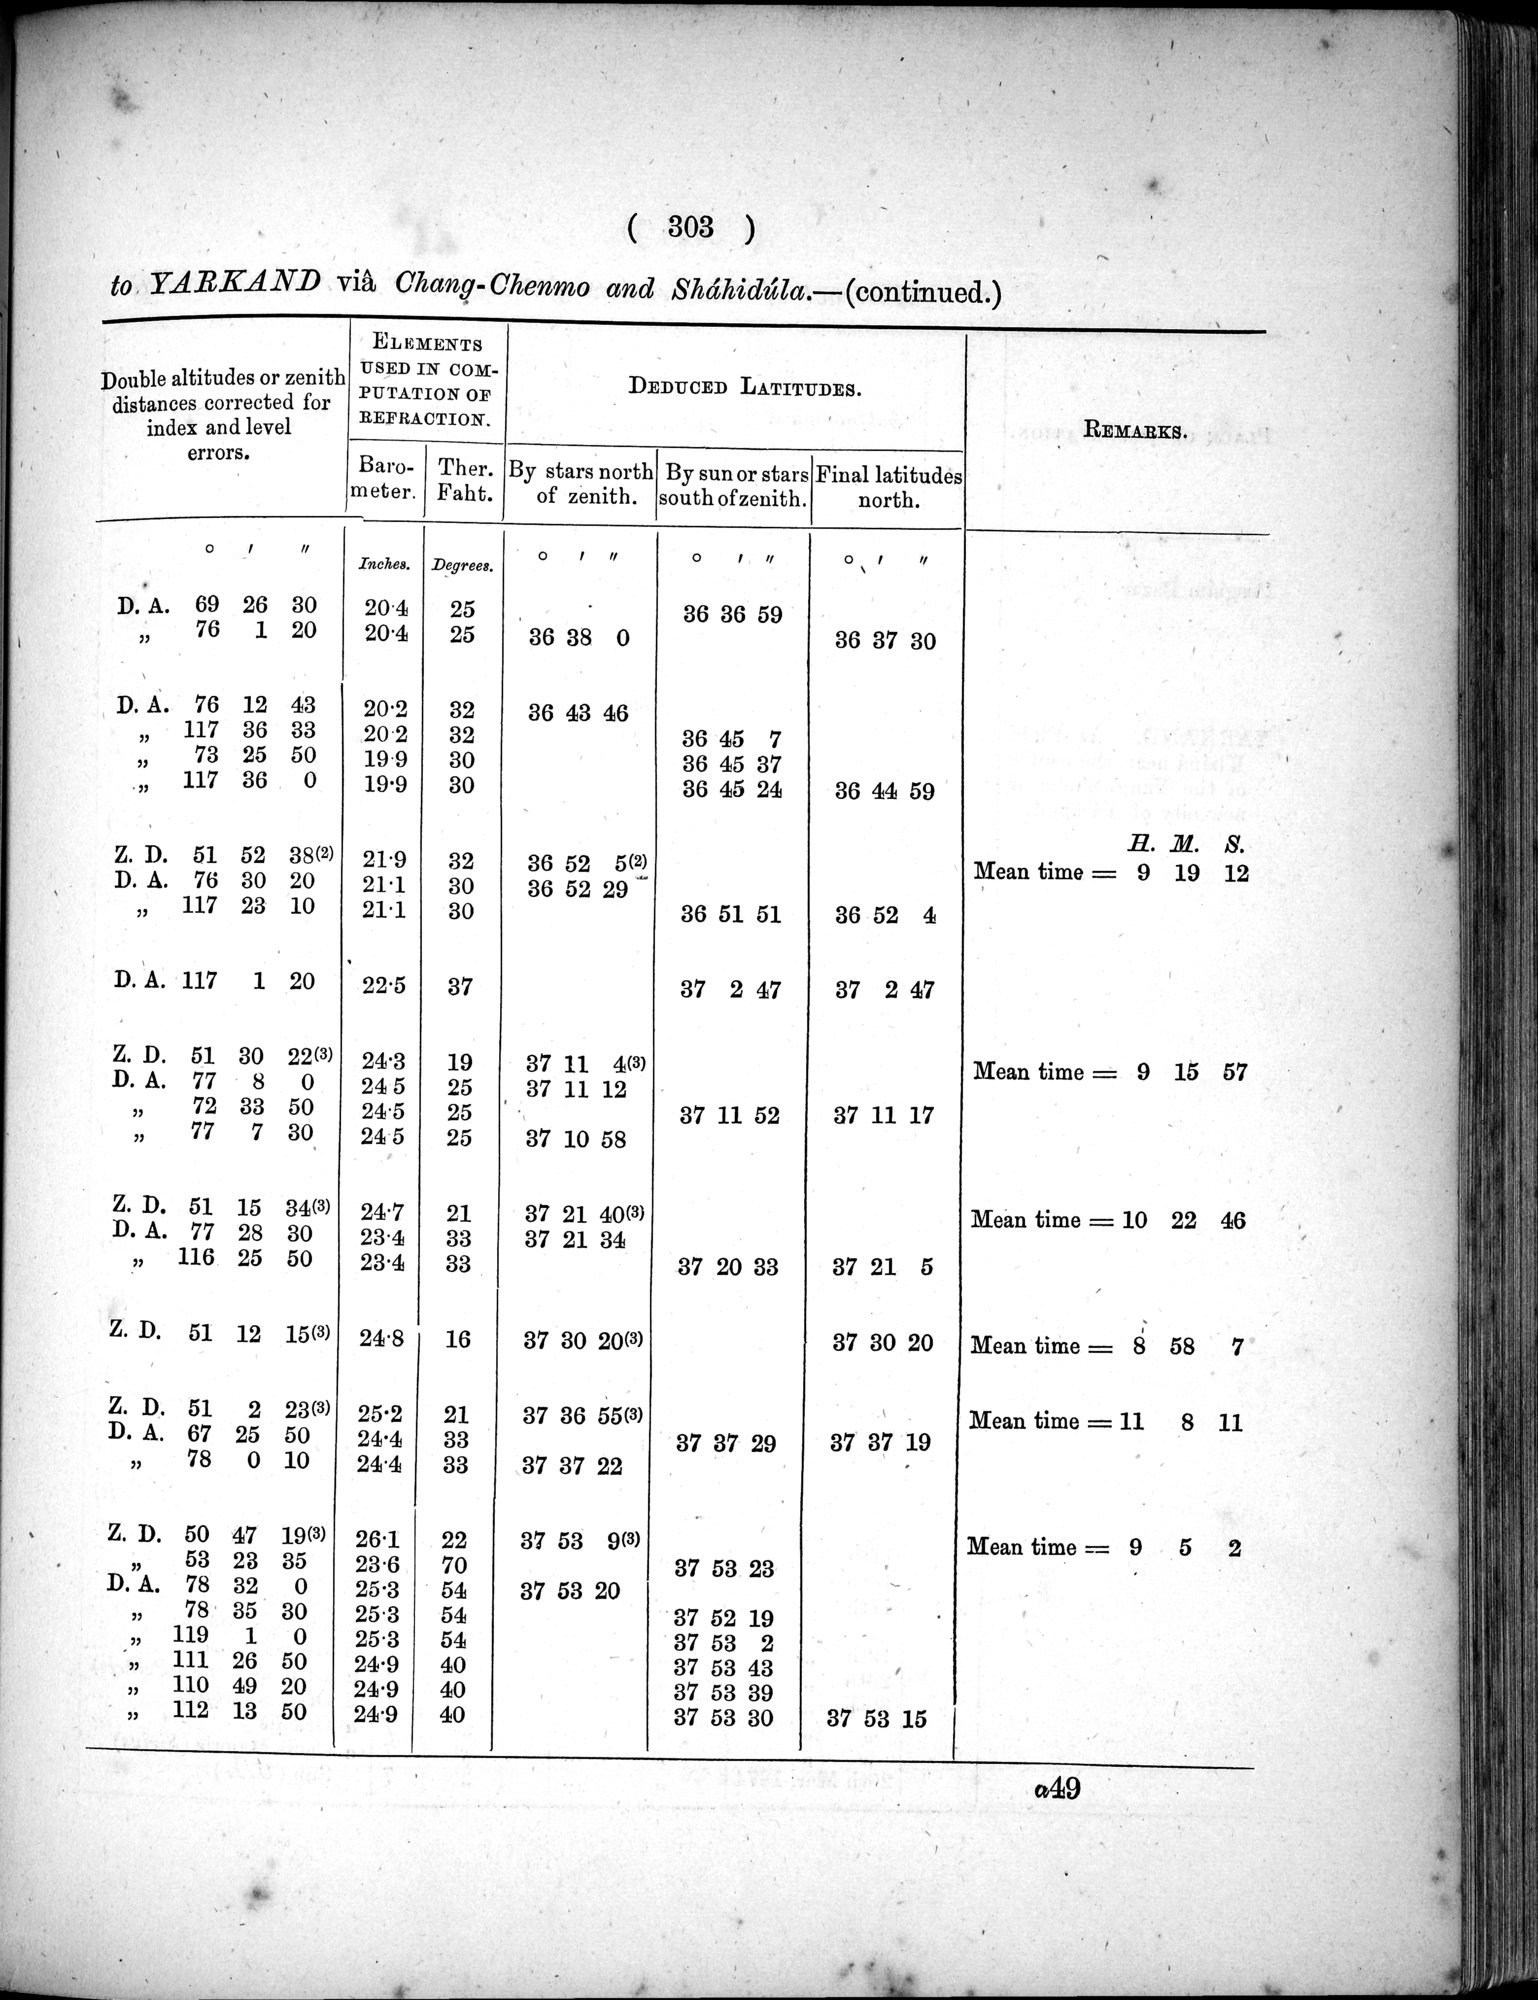 Report of a Mission to Yarkund in 1873 : vol.1 / Page 437 (Grayscale High Resolution Image)